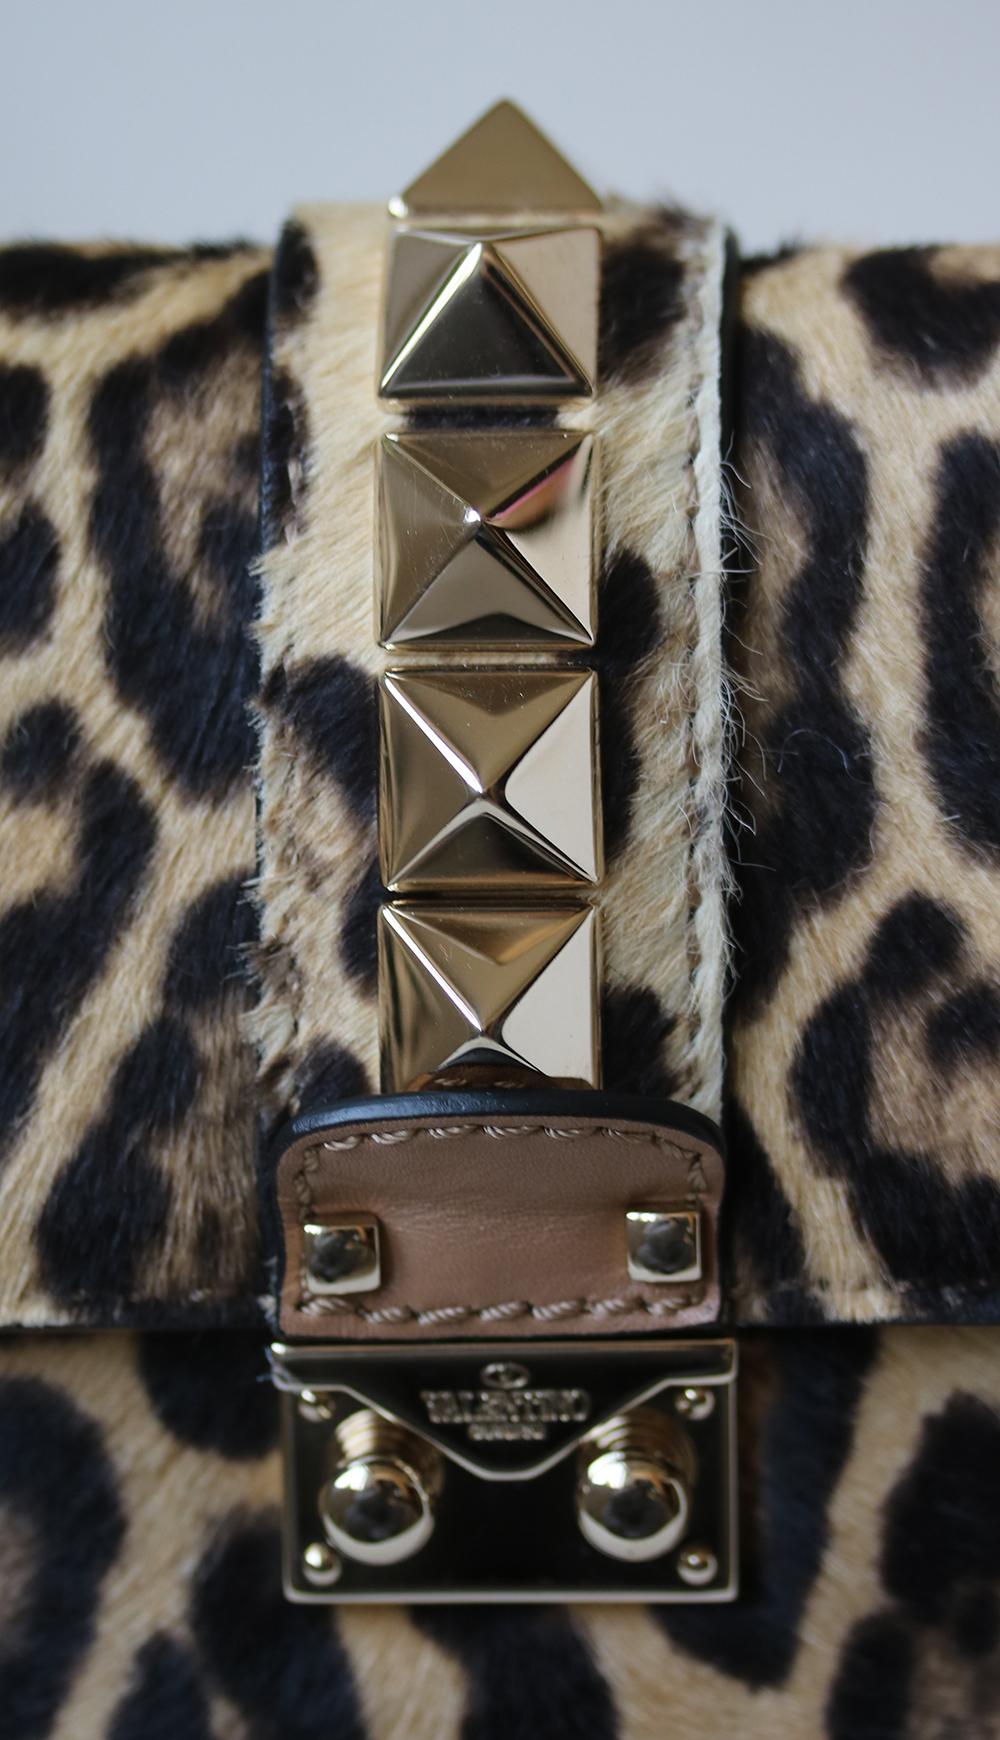 Hand-applied pyramid studs give Valentino Garavani's 'Lock' bag its inimitable finish. This calf-hair leopard-print design has been crafted in Italy with a compact canvas-lined interior that will easily house your smartphone, makeup compact and